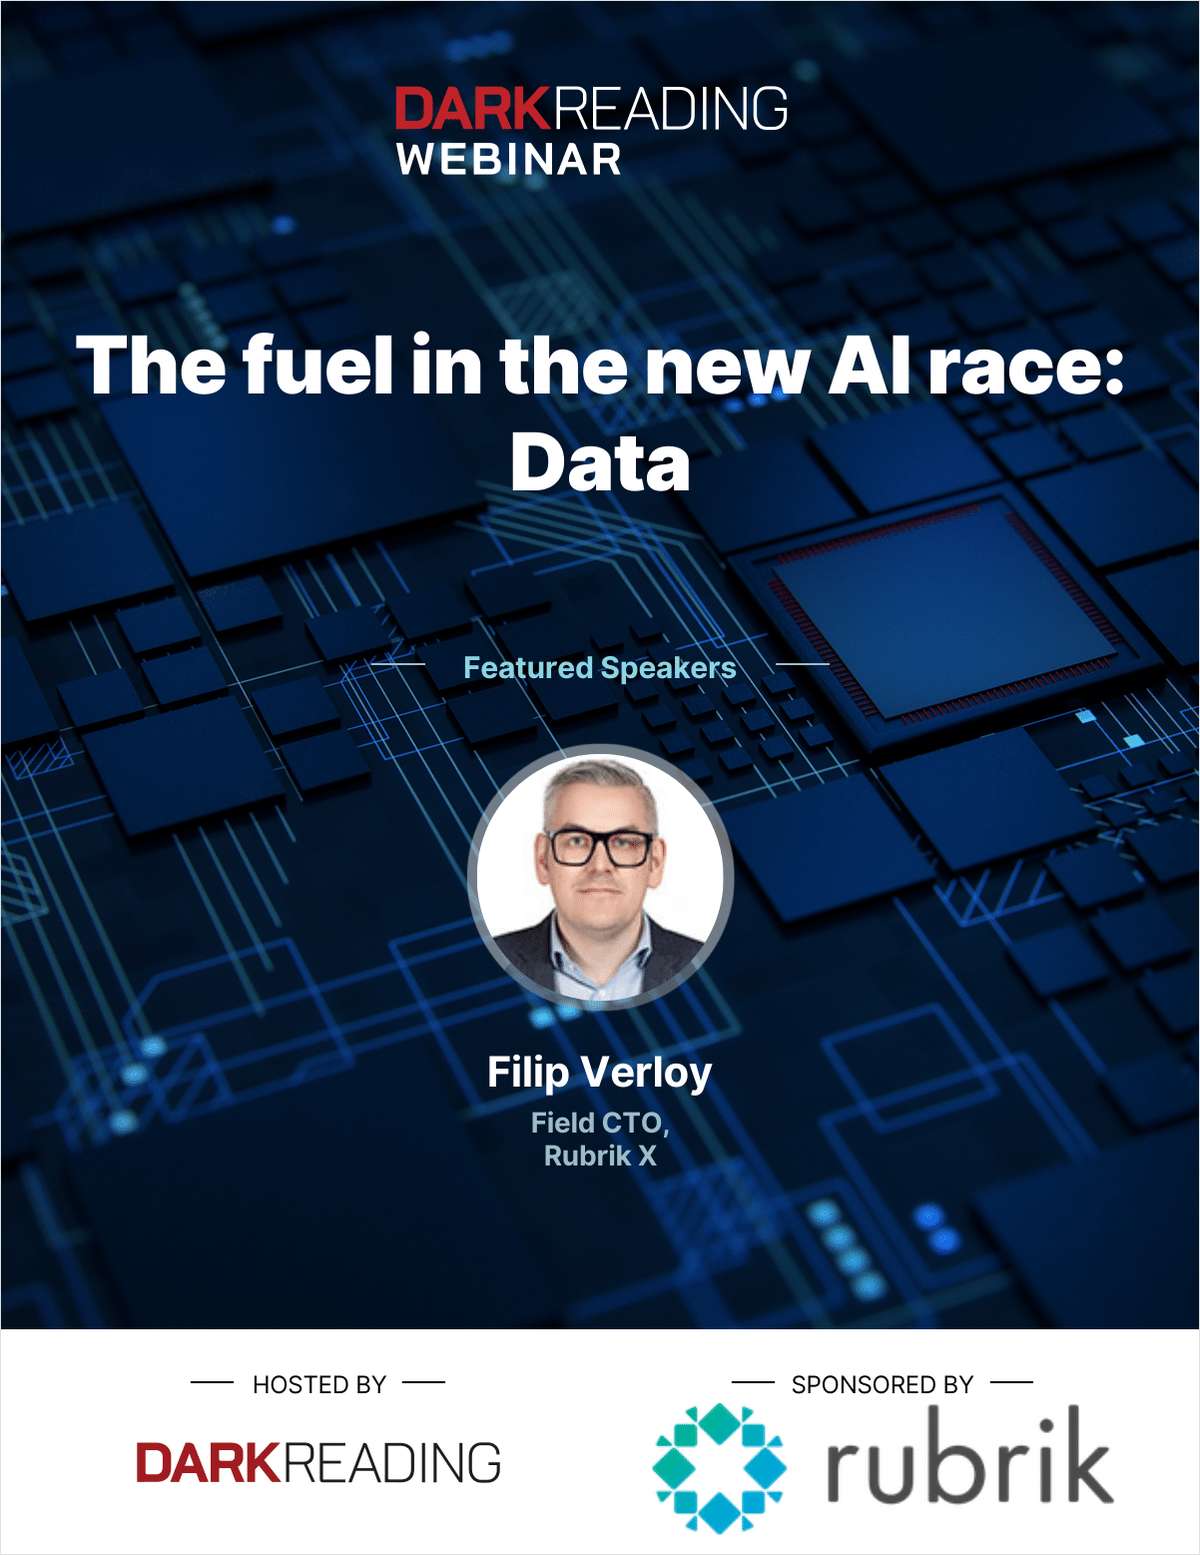 The fuel in the new AI race: Data